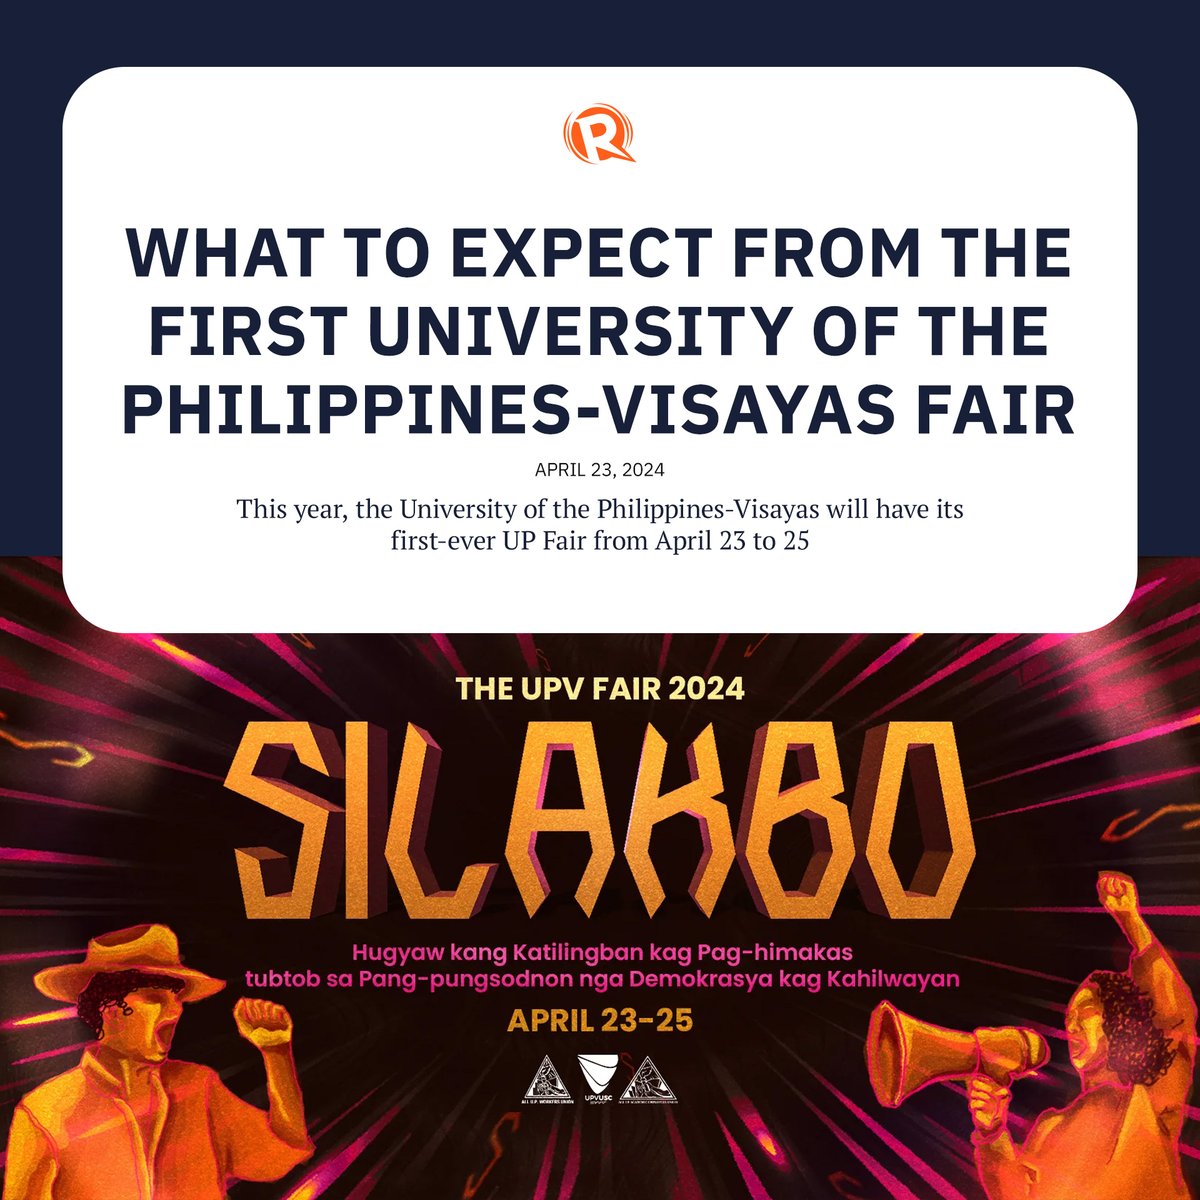 The UP Fair has been one of the most anticipated events in some University of the Philippines campuses. This year, UP Visayas will have its first-ever UP Fair – that will serve as a celebration of artistry and advocacies combined in one event. trib.al/lgXHaWt